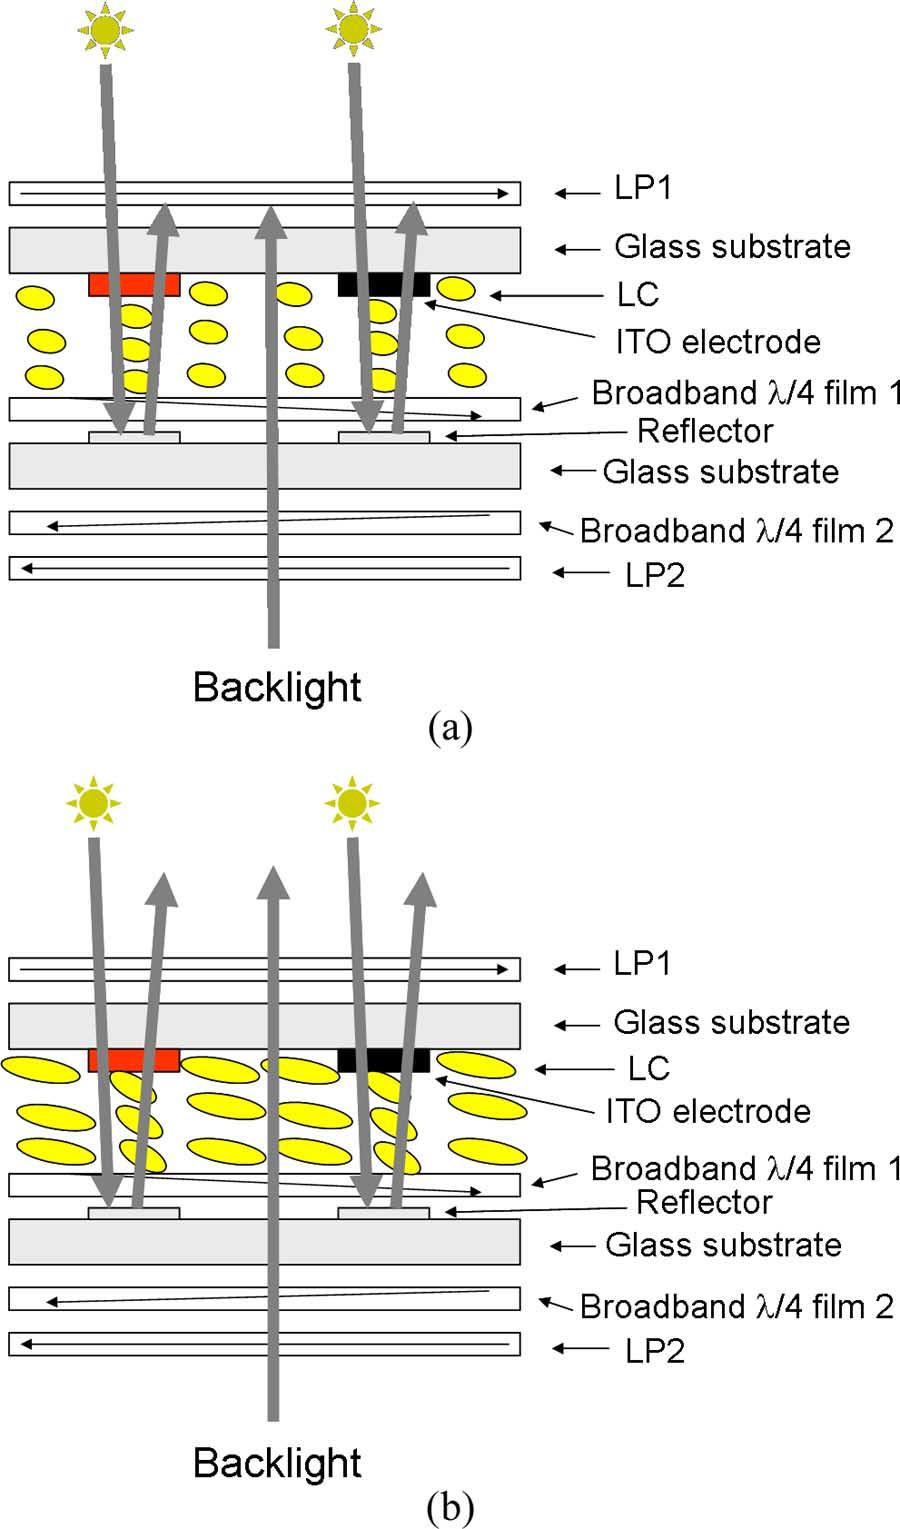 16 JOURNAL OF DISPLAY TECHNOLOGY, VOL. 3, NO. 1, MARCH 2007 electric field. Therefore, the light transmits through the transflective IPS device, and a bright state is obtained in both T- and R-modes.